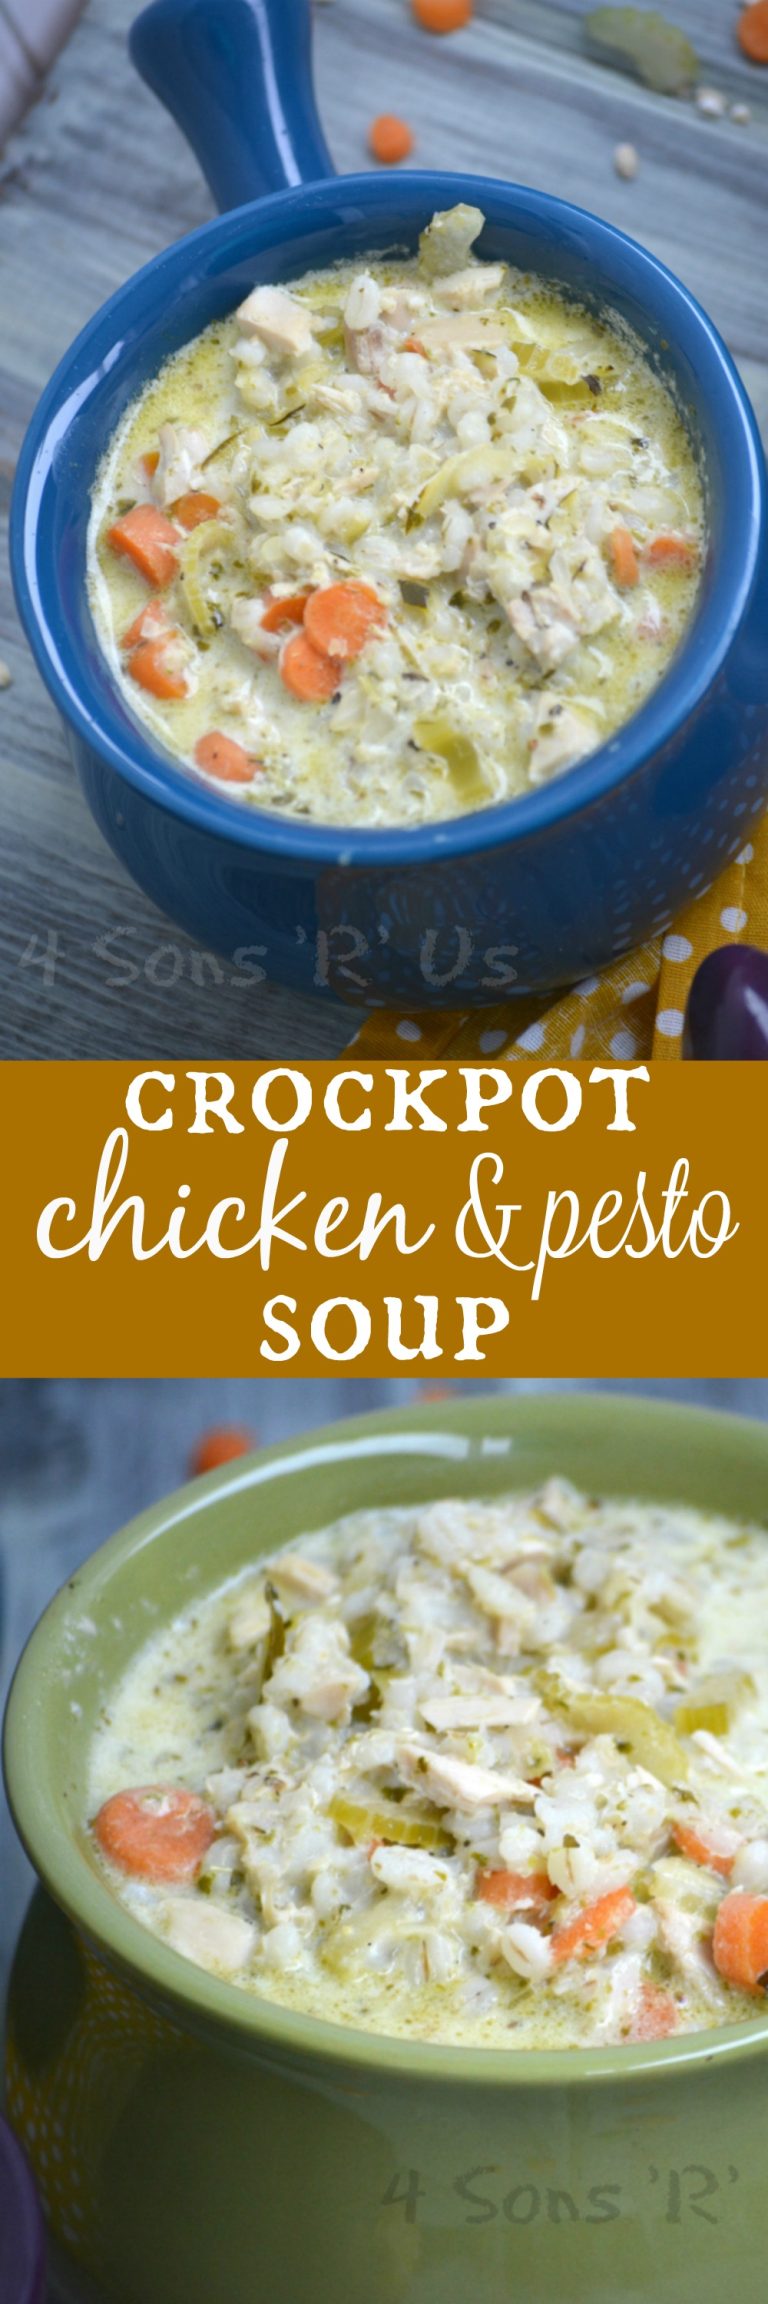 Crockpot Chicken And Pesto Soup - 4 Sons 'R' Us